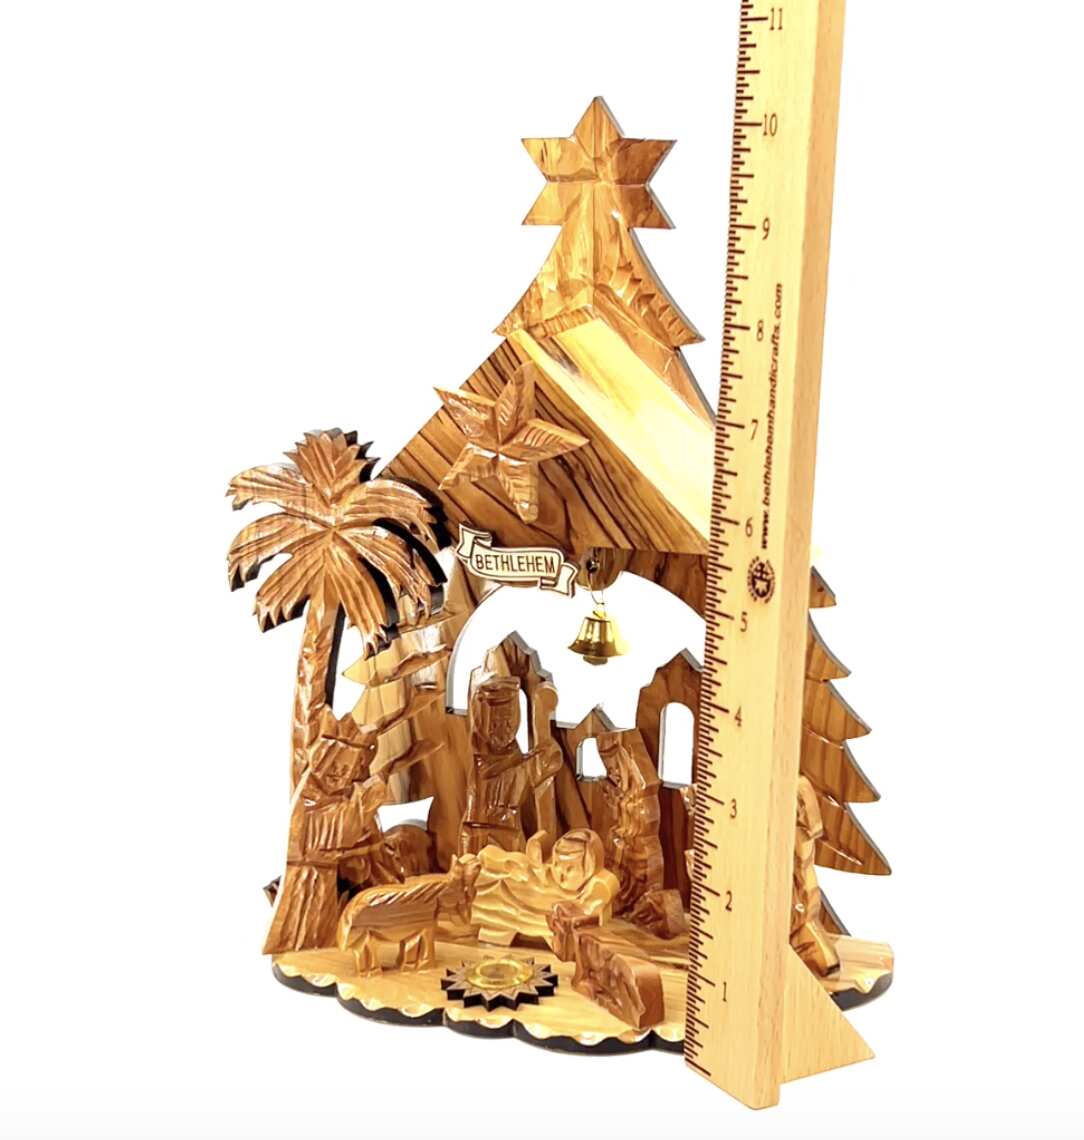 Nativity Scene with Music Player, 10.5" Handmade in Holy Land